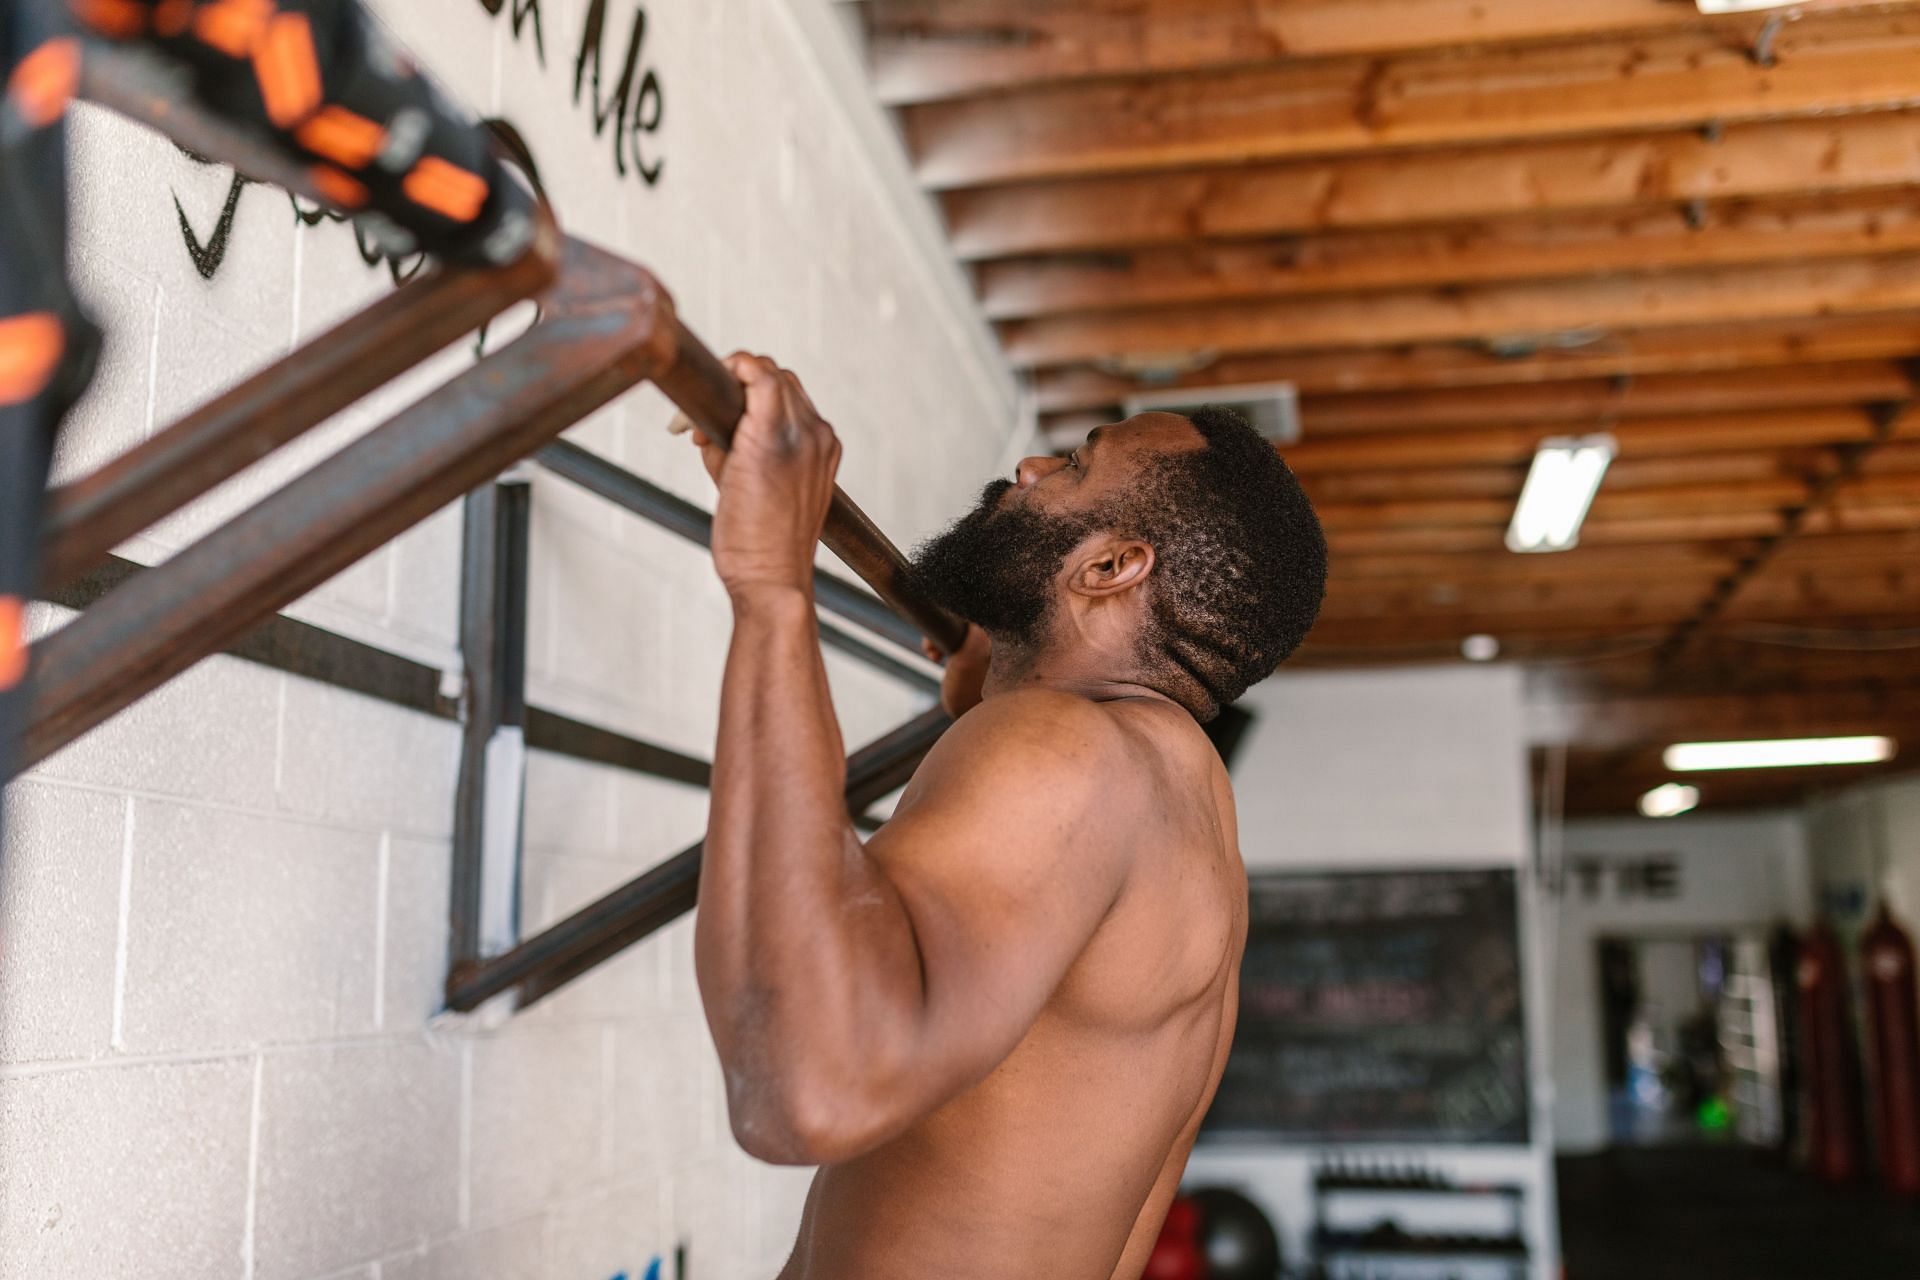 Pulling exercises are done in conjunction with pushing exercises, on alternate days, to build muscle evenly (Image via Pexels @Rodnae Productions)